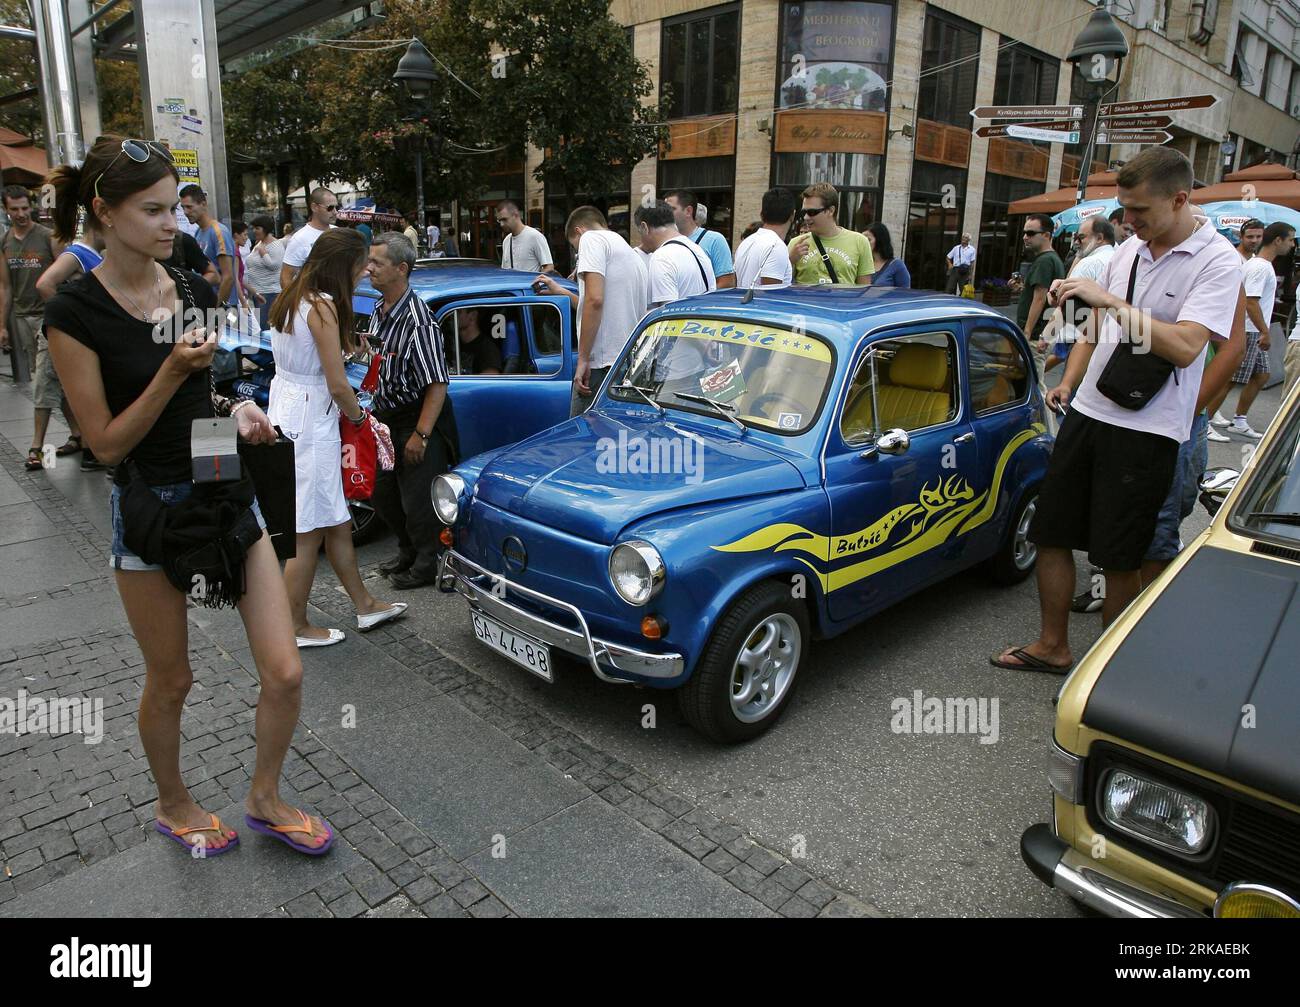 Bildnummer: 54329519  Datum: 22.08.2010  Copyright: imago/Xinhua (100823) -- BELGRADE, Aug. 23, 2010 (Xinhua) -- take look at then Yugoslav cars displayed at Central Square in Belgrade on Aug. 22, 2010. The Zastava 750 car made by the then Yugoslavian car producer Zavod Crvena Zastava was the then Yugoslavian version of Fiat 600 under license from 1955 to 1985. The cars are still widely available in Serbia, Montenegro, and Bosnia and Herzegovina. (Xinhua)(Serbia Out) SERBIA-BELGRADE-OLD CARS-DISPLAY PUBLICATIONxNOTxINxCHN Wirtschaft Gesellschaft Oldtimer Auto Ausstellung kbdig xub 2010 quer Stock Photo